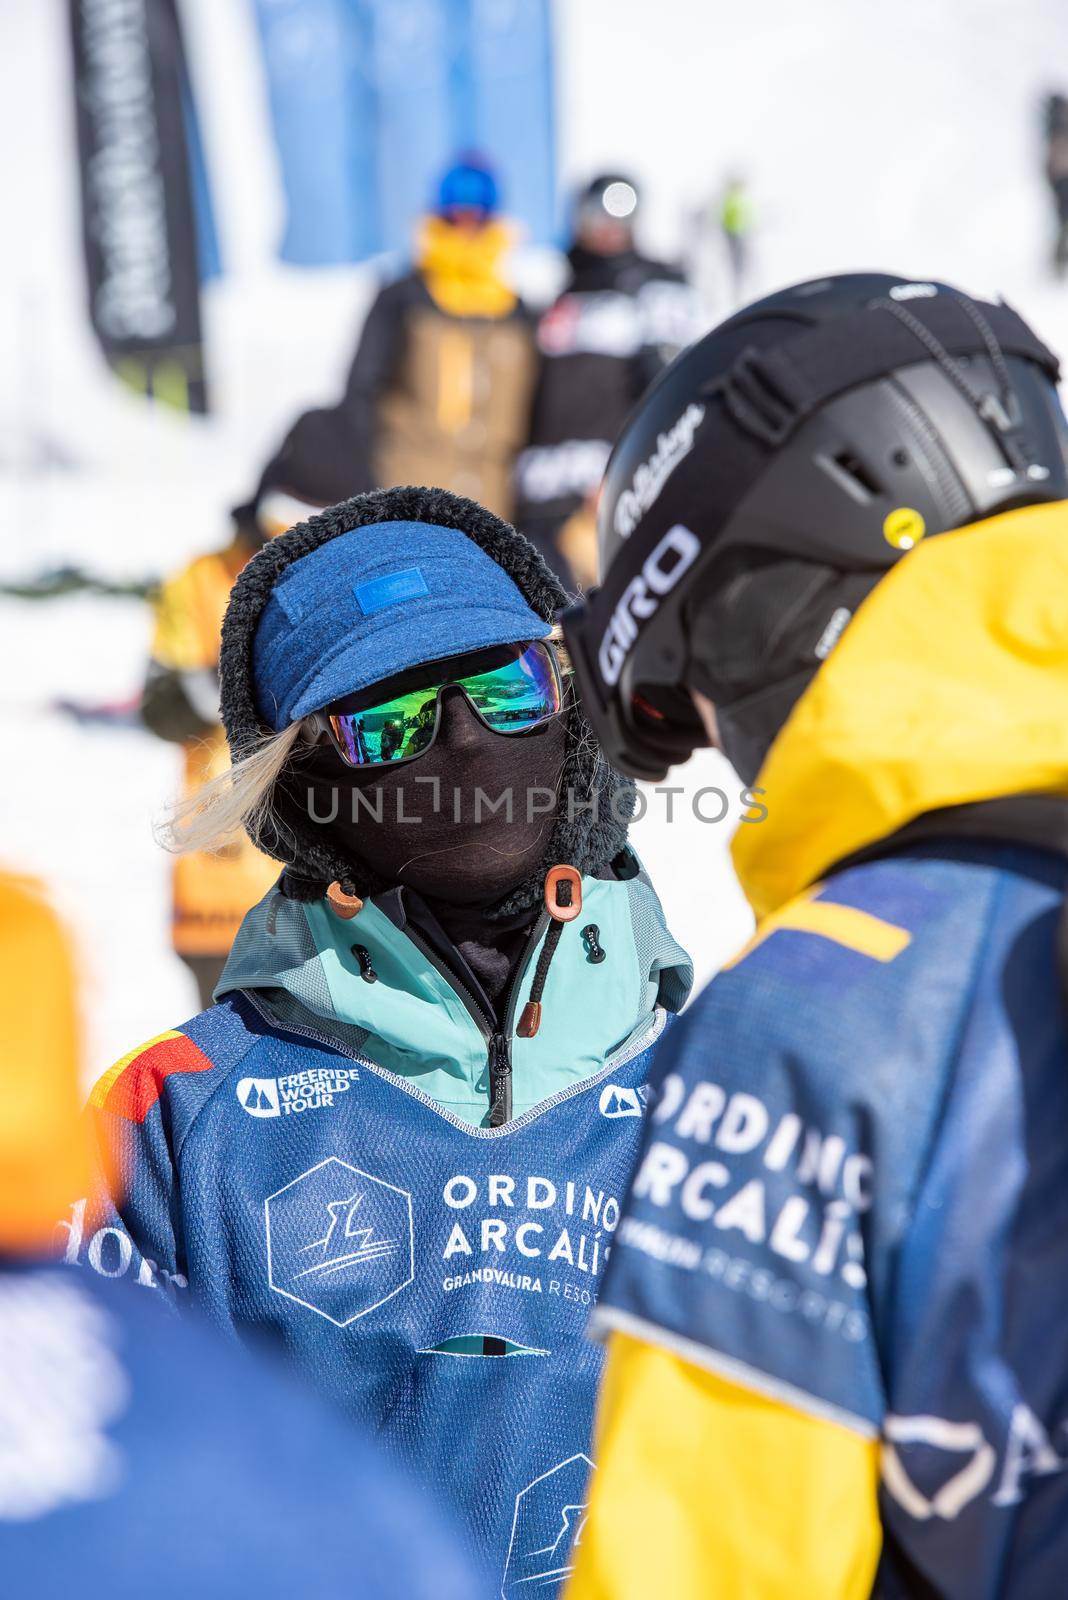 Ordino Arcalis, Andorra: 2021 February 24: Skiers in action at the Freeride World Tour 2021 Step 2 at Ordino Alcalis in Andorra in the winter of 2021.